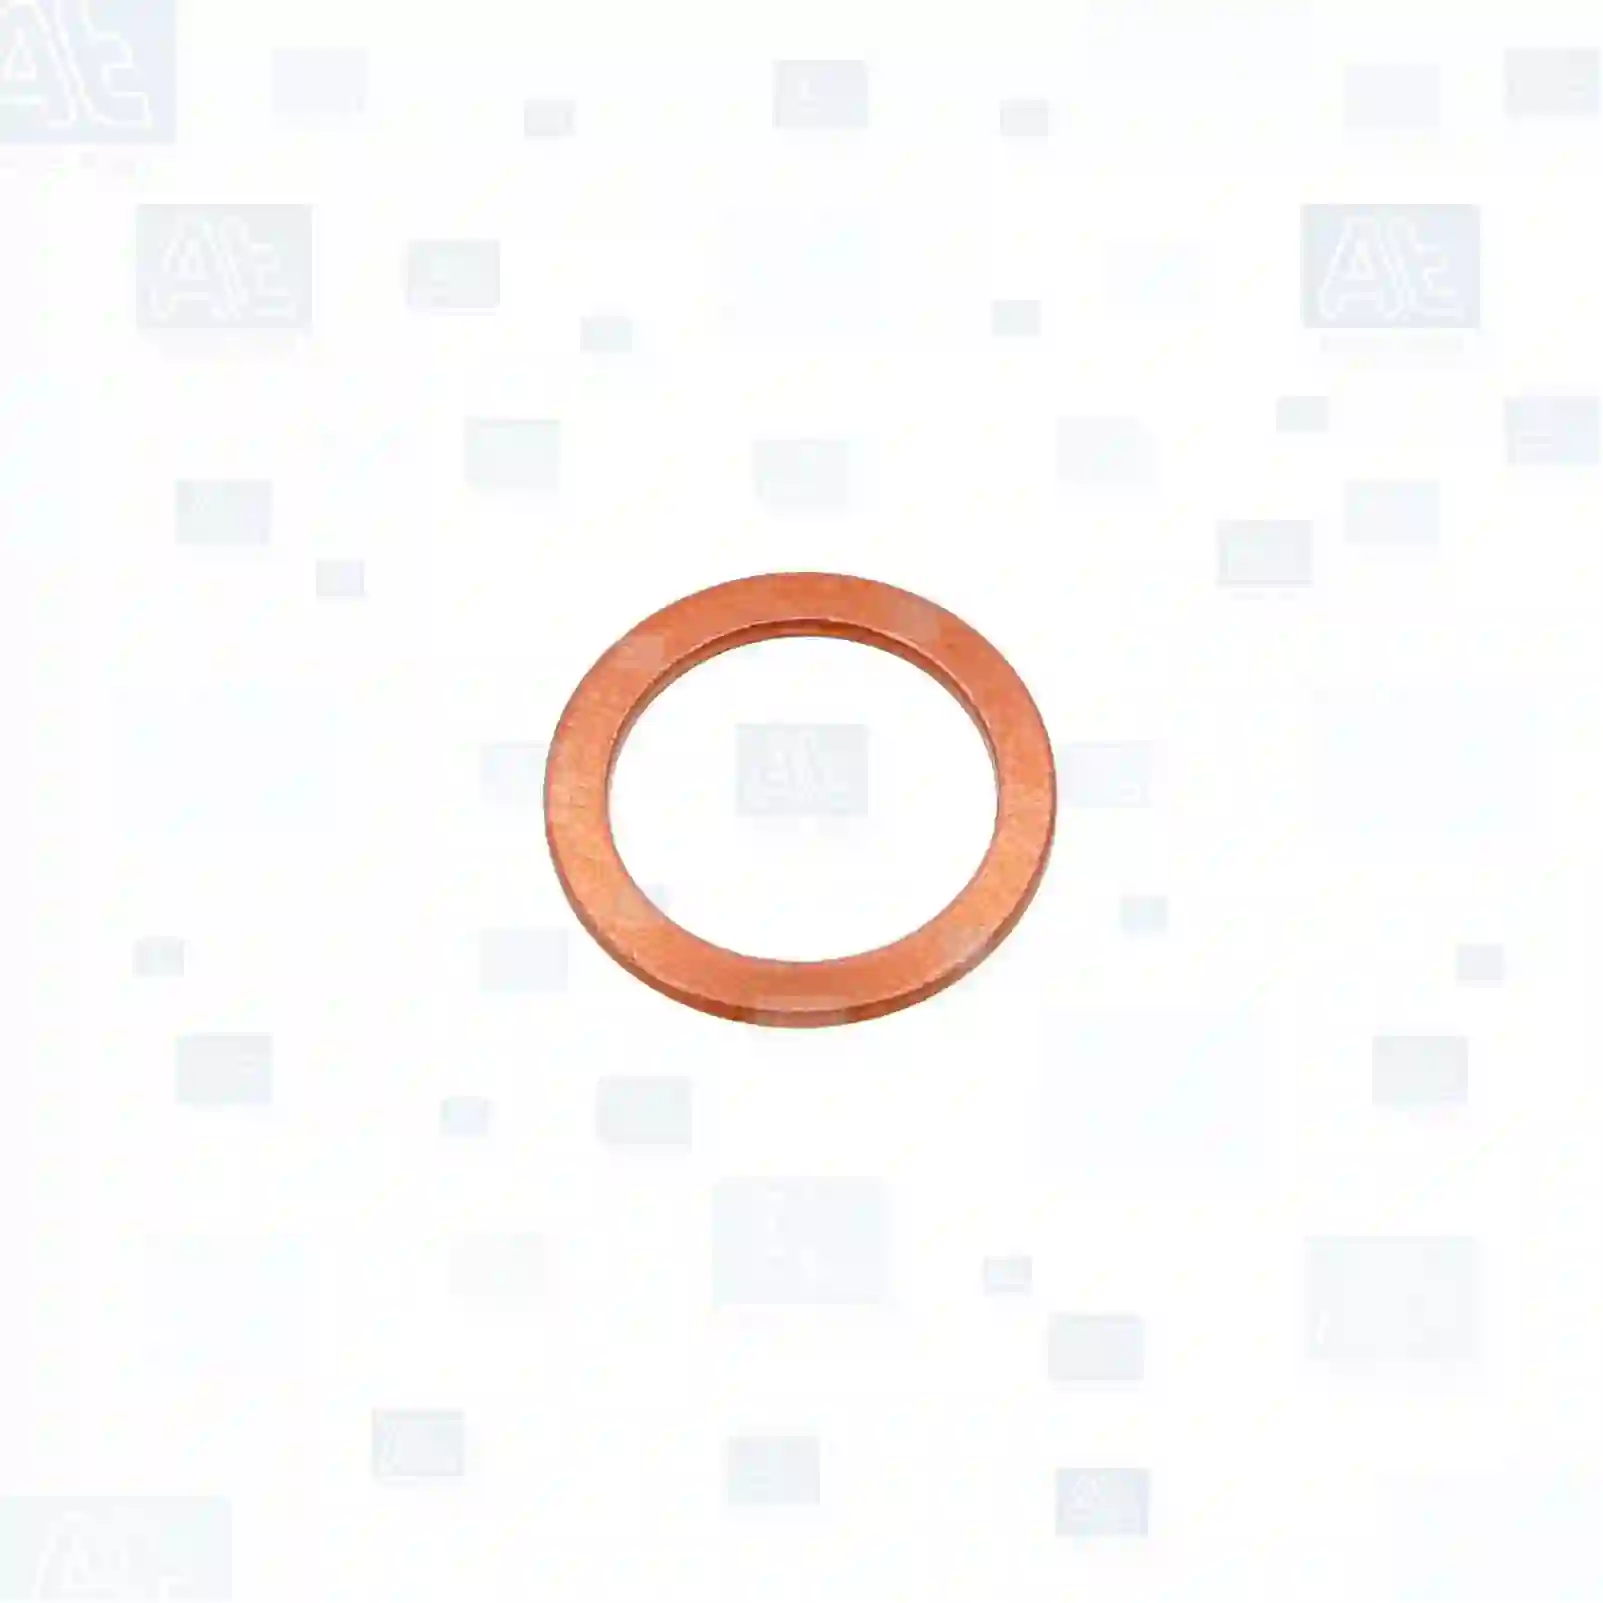 Copper washer, at no 77725019, oem no: N0138062, 141204, 202736, 01118664, 10260160, 11016719, 0996731007, N007603010103, 933087R2, 09916210, 10260160, 9916210, 01118664, 06561800715, 007603010103, 007603010110, 007603010404, 01118664, 604920101014, 2091006, 141204, 90012300320, 0122999200, 7400947281, 178562, 204466, N0138062, N0138062, 17417-79J50, 1662025, 18836, 947083, 947281, N0138062, N138062, ZG40230-0008 At Spare Part | Engine, Accelerator Pedal, Camshaft, Connecting Rod, Crankcase, Crankshaft, Cylinder Head, Engine Suspension Mountings, Exhaust Manifold, Exhaust Gas Recirculation, Filter Kits, Flywheel Housing, General Overhaul Kits, Engine, Intake Manifold, Oil Cleaner, Oil Cooler, Oil Filter, Oil Pump, Oil Sump, Piston & Liner, Sensor & Switch, Timing Case, Turbocharger, Cooling System, Belt Tensioner, Coolant Filter, Coolant Pipe, Corrosion Prevention Agent, Drive, Expansion Tank, Fan, Intercooler, Monitors & Gauges, Radiator, Thermostat, V-Belt / Timing belt, Water Pump, Fuel System, Electronical Injector Unit, Feed Pump, Fuel Filter, cpl., Fuel Gauge Sender,  Fuel Line, Fuel Pump, Fuel Tank, Injection Line Kit, Injection Pump, Exhaust System, Clutch & Pedal, Gearbox, Propeller Shaft, Axles, Brake System, Hubs & Wheels, Suspension, Leaf Spring, Universal Parts / Accessories, Steering, Electrical System, Cabin Copper washer, at no 77725019, oem no: N0138062, 141204, 202736, 01118664, 10260160, 11016719, 0996731007, N007603010103, 933087R2, 09916210, 10260160, 9916210, 01118664, 06561800715, 007603010103, 007603010110, 007603010404, 01118664, 604920101014, 2091006, 141204, 90012300320, 0122999200, 7400947281, 178562, 204466, N0138062, N0138062, 17417-79J50, 1662025, 18836, 947083, 947281, N0138062, N138062, ZG40230-0008 At Spare Part | Engine, Accelerator Pedal, Camshaft, Connecting Rod, Crankcase, Crankshaft, Cylinder Head, Engine Suspension Mountings, Exhaust Manifold, Exhaust Gas Recirculation, Filter Kits, Flywheel Housing, General Overhaul Kits, Engine, Intake Manifold, Oil Cleaner, Oil Cooler, Oil Filter, Oil Pump, Oil Sump, Piston & Liner, Sensor & Switch, Timing Case, Turbocharger, Cooling System, Belt Tensioner, Coolant Filter, Coolant Pipe, Corrosion Prevention Agent, Drive, Expansion Tank, Fan, Intercooler, Monitors & Gauges, Radiator, Thermostat, V-Belt / Timing belt, Water Pump, Fuel System, Electronical Injector Unit, Feed Pump, Fuel Filter, cpl., Fuel Gauge Sender,  Fuel Line, Fuel Pump, Fuel Tank, Injection Line Kit, Injection Pump, Exhaust System, Clutch & Pedal, Gearbox, Propeller Shaft, Axles, Brake System, Hubs & Wheels, Suspension, Leaf Spring, Universal Parts / Accessories, Steering, Electrical System, Cabin